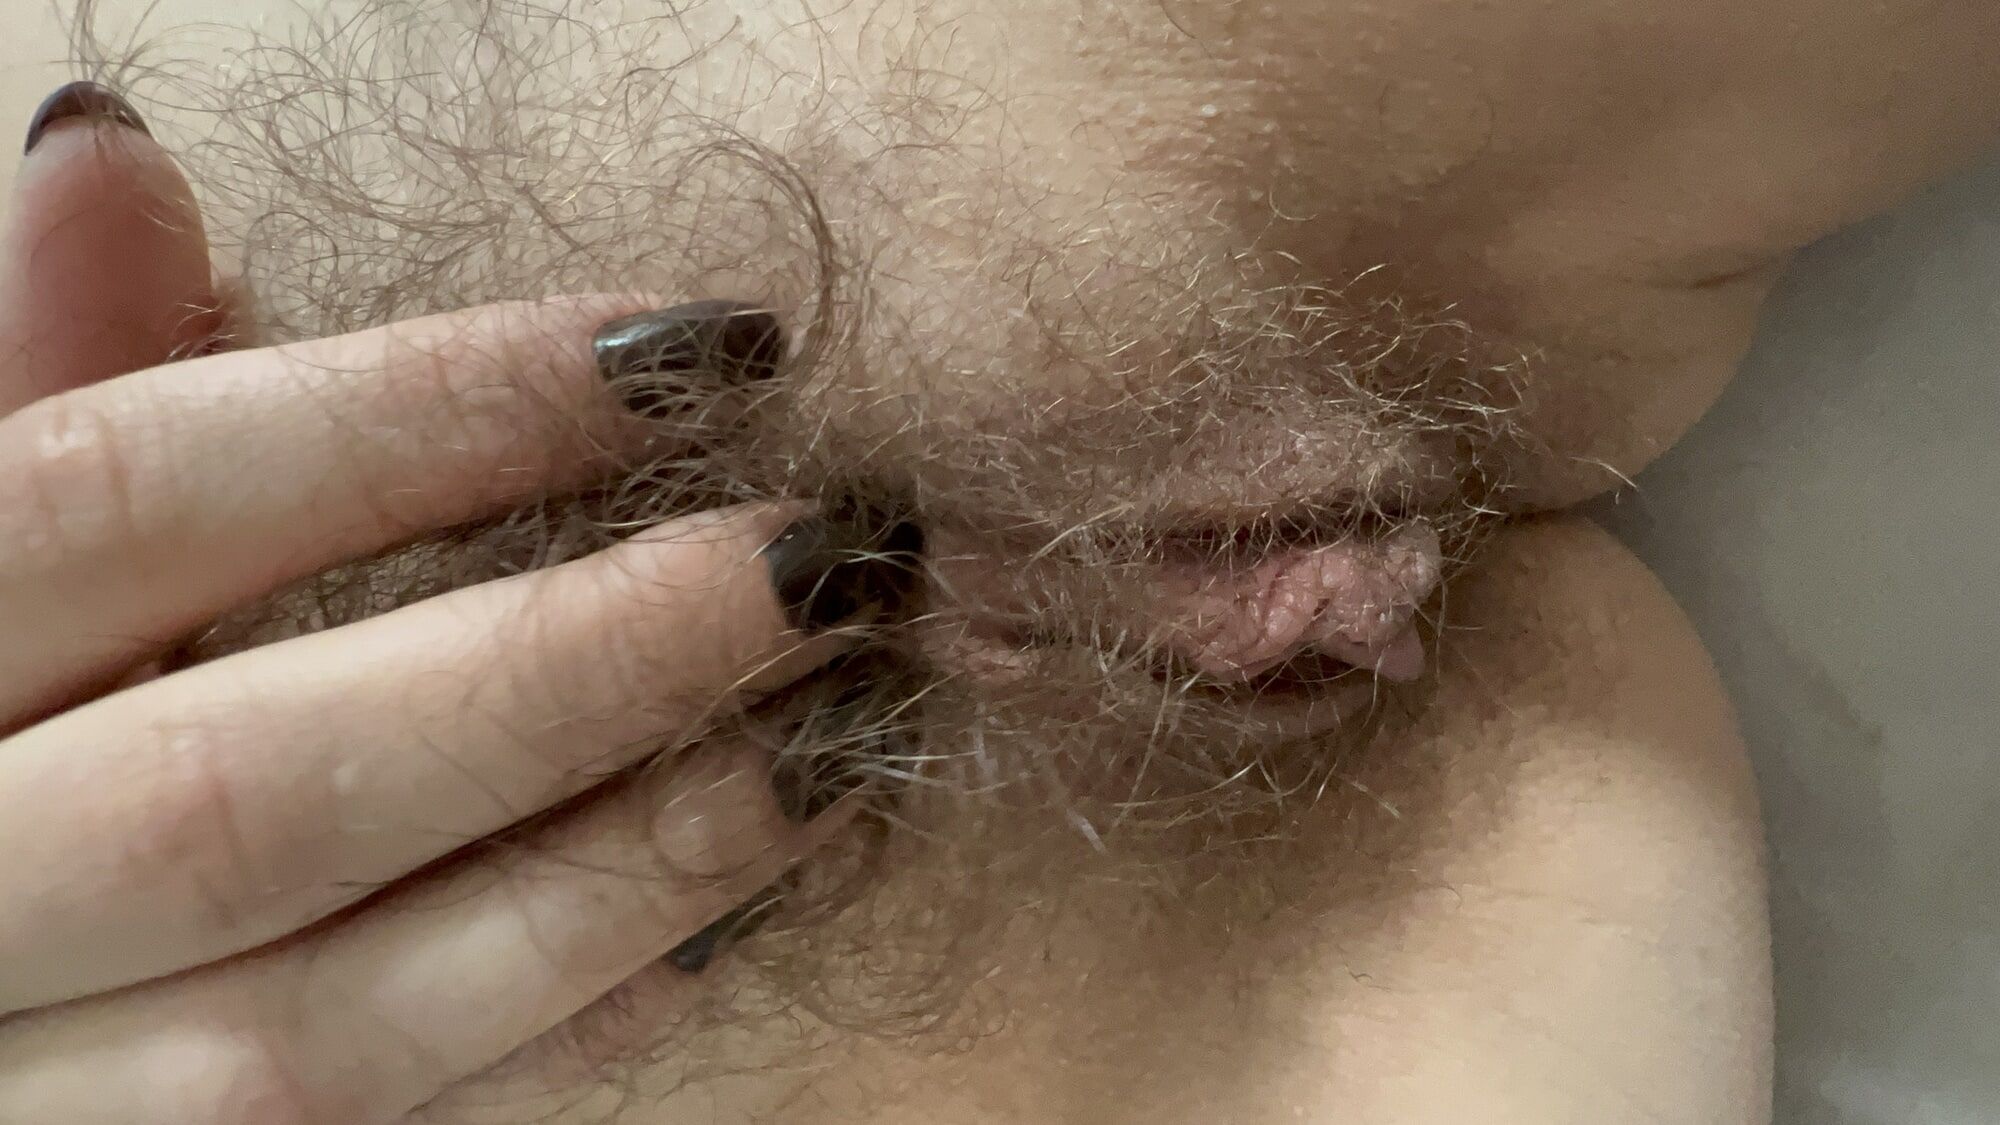 Wife bush over last 18 years, I love her hairy amateur cunt #53